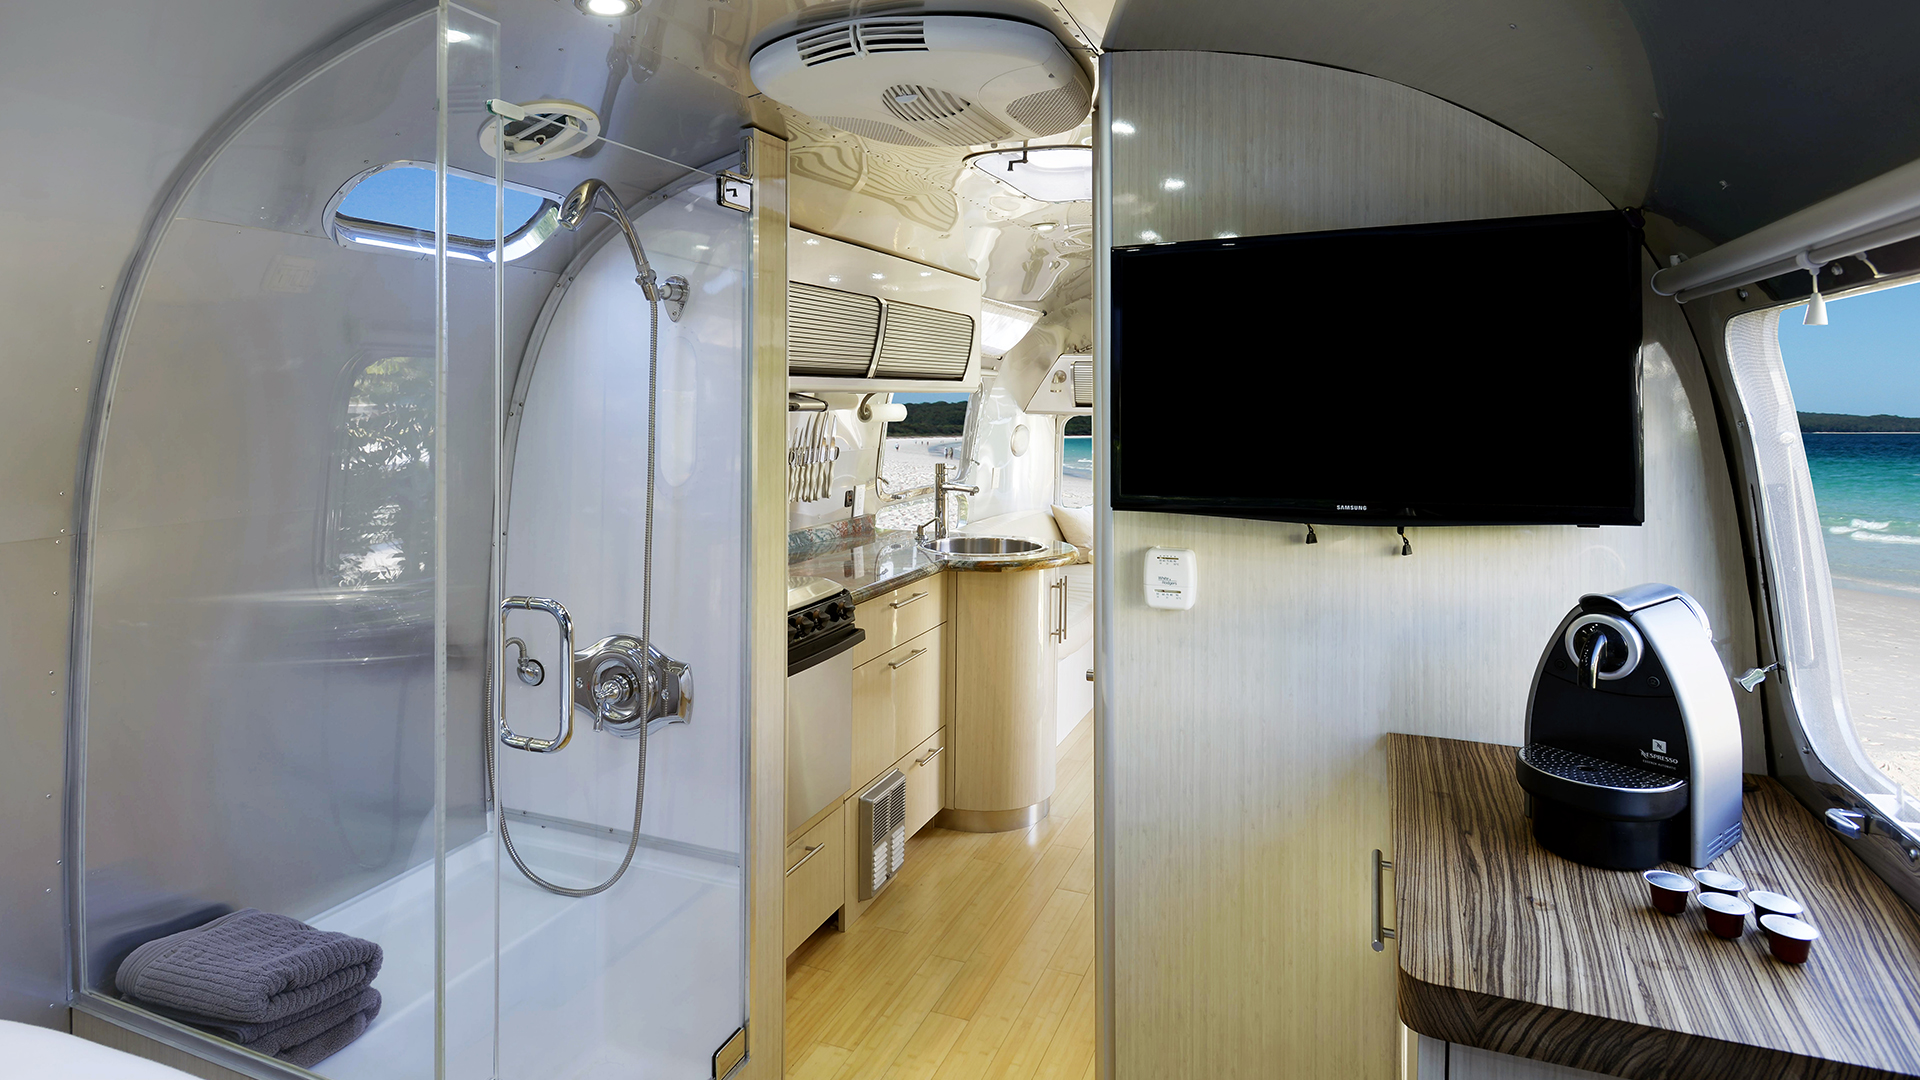 Tiny Home Tour: DIY Remodel of a '72 Airstream Trailer | Apartment Therapy